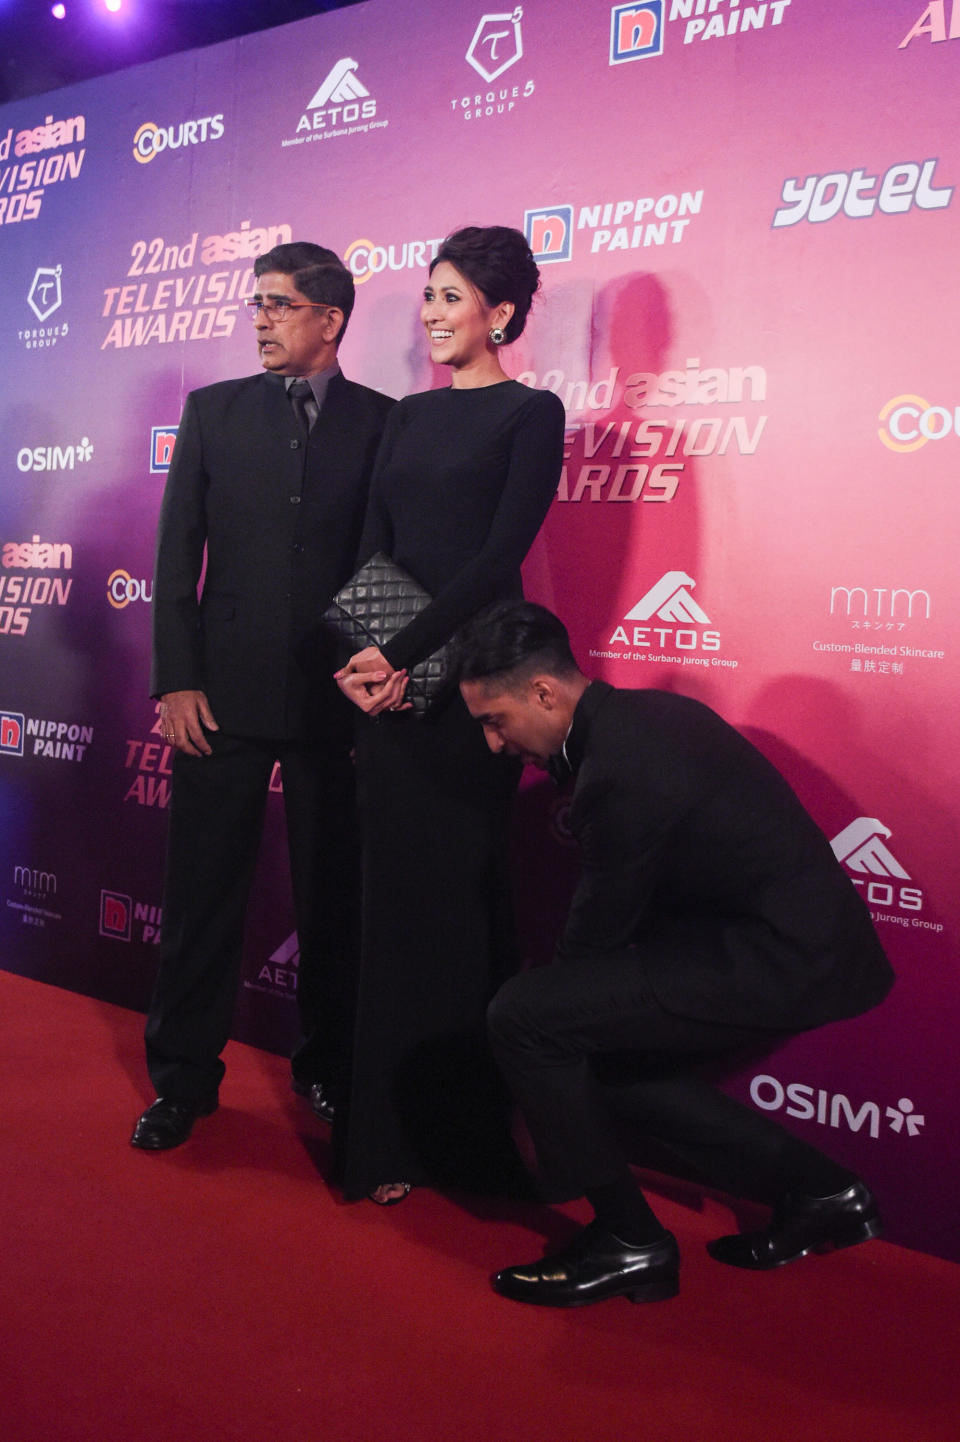 <p>Actor J. Jai Kishan helps actress Nurul Aini with her dress as they pose for photos on the red carpet with veteran actor R. Chandran at the 22nd Asian Television Awards. (Photo: Joseph Nair for Yahoo Lifestyle Singapore) </p>